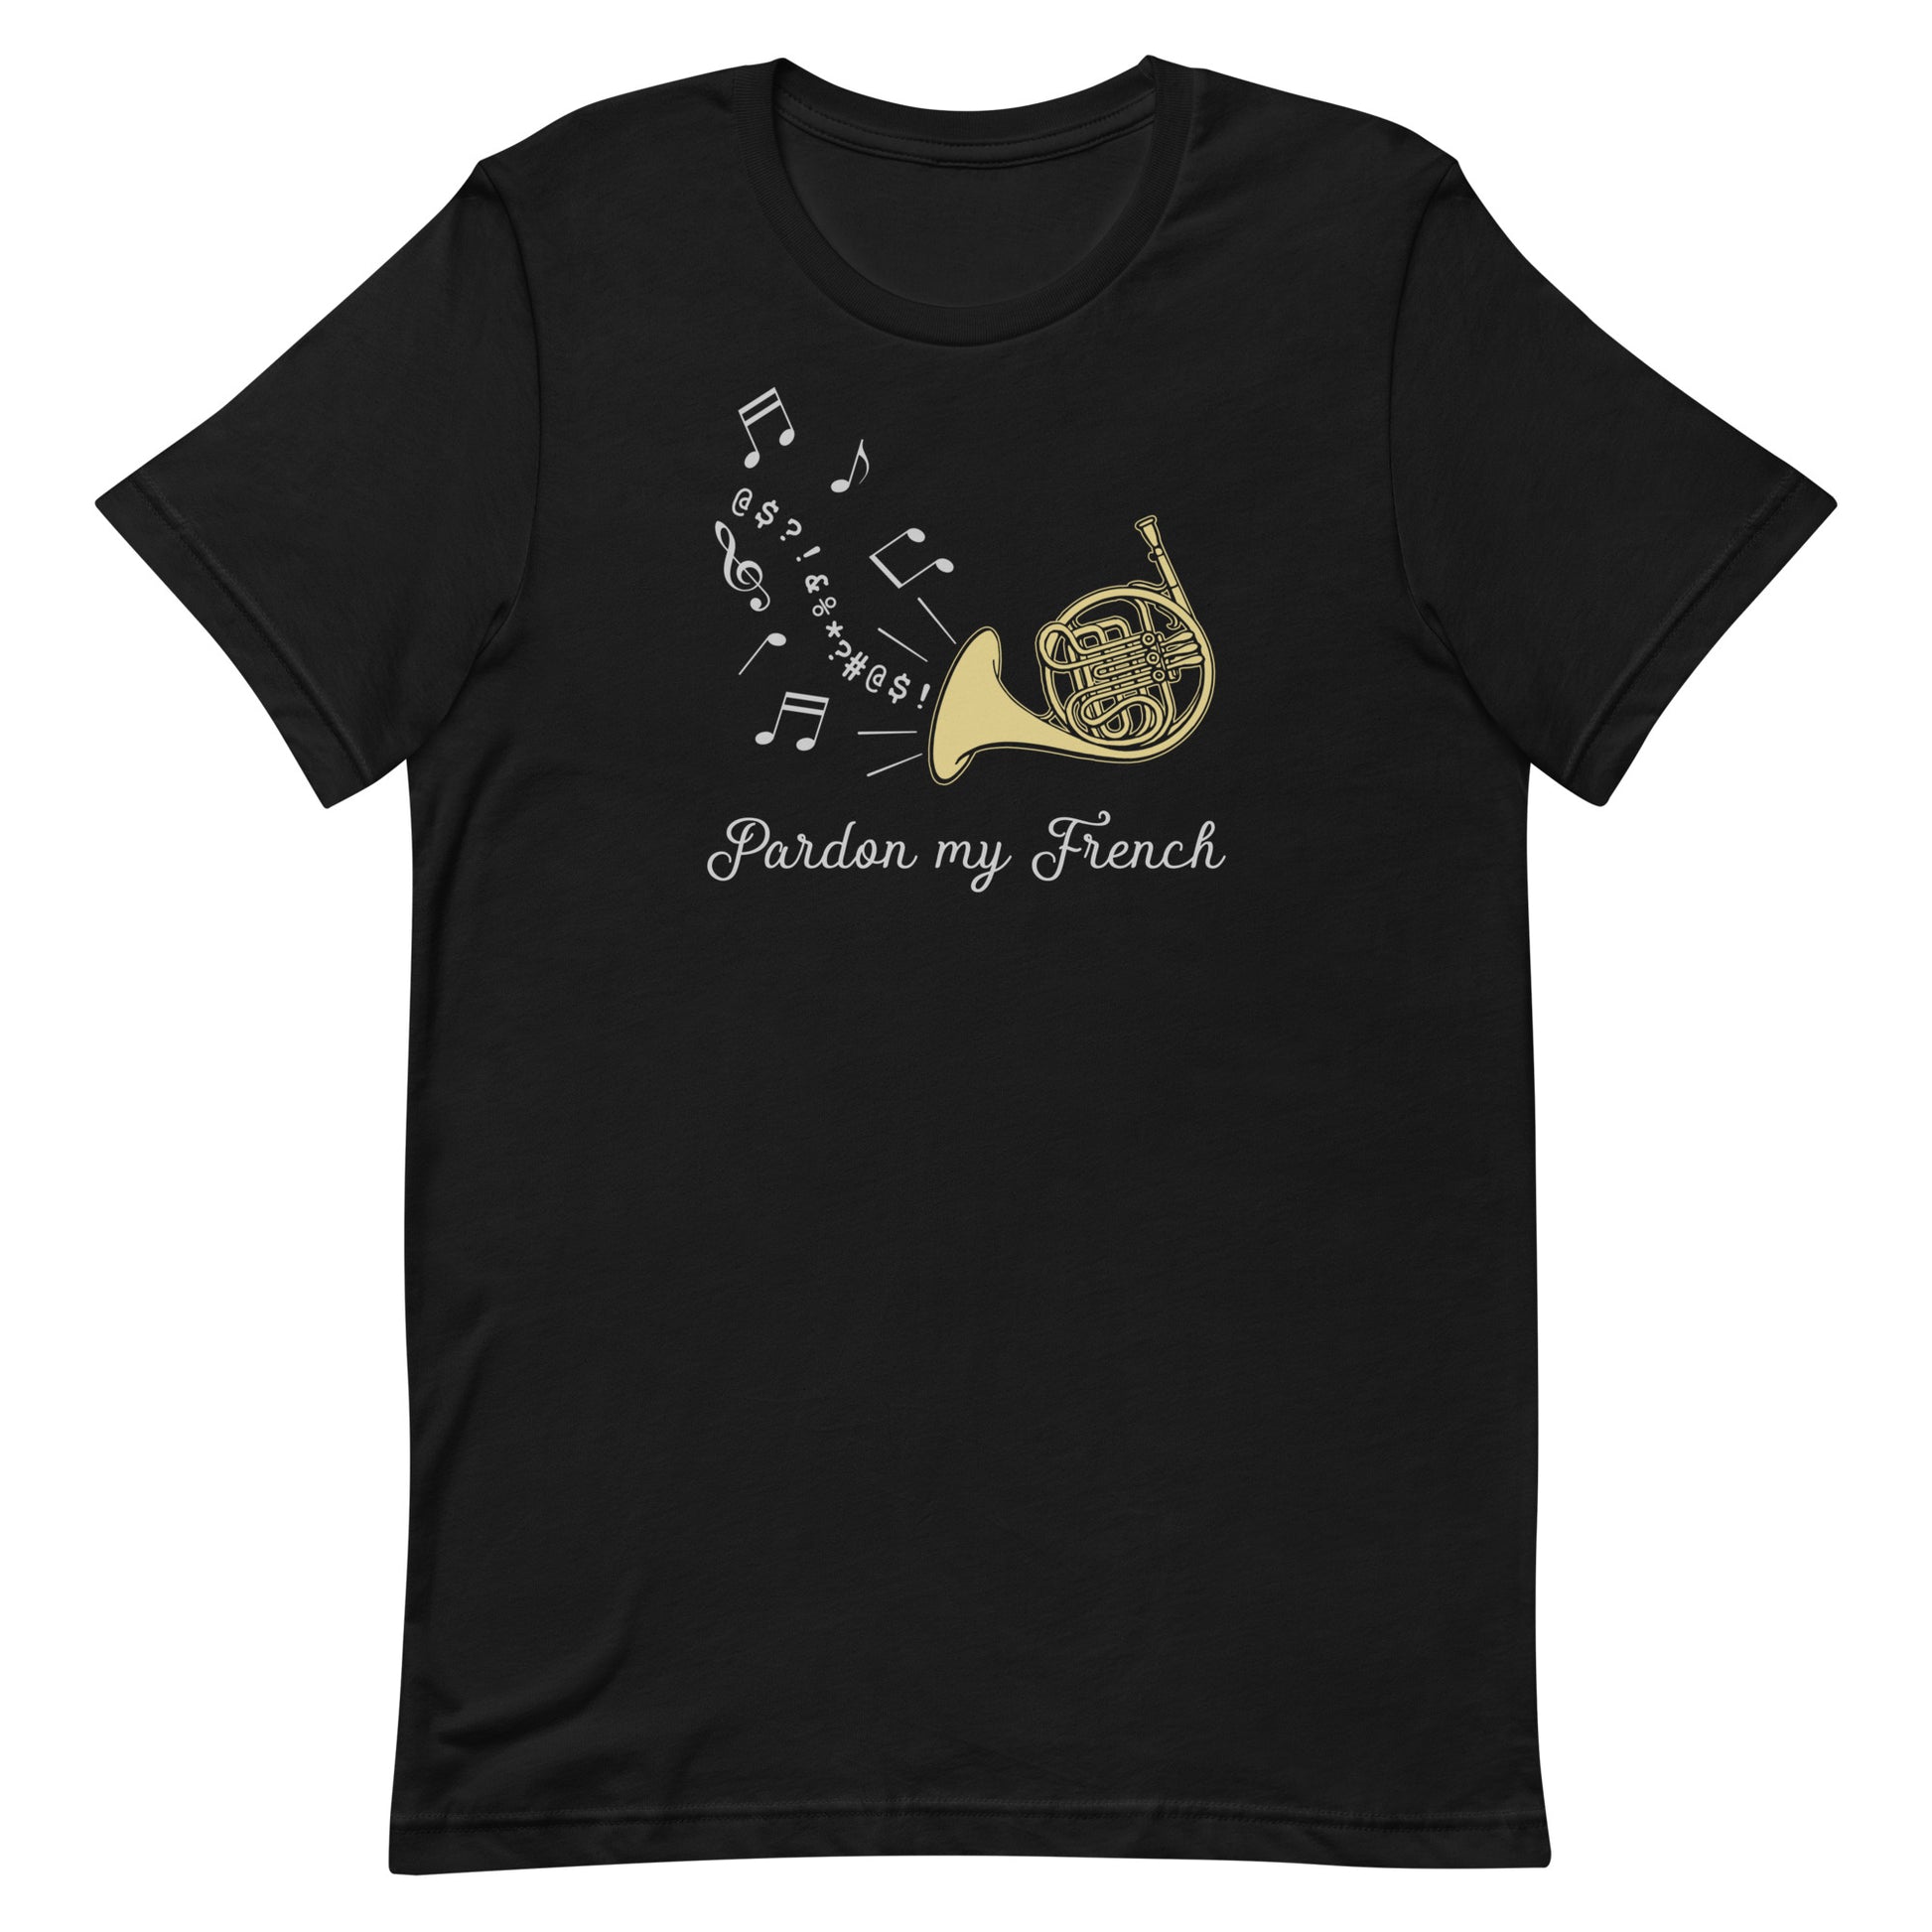 Funny French Horn T Shirt: Pardon My French - Black